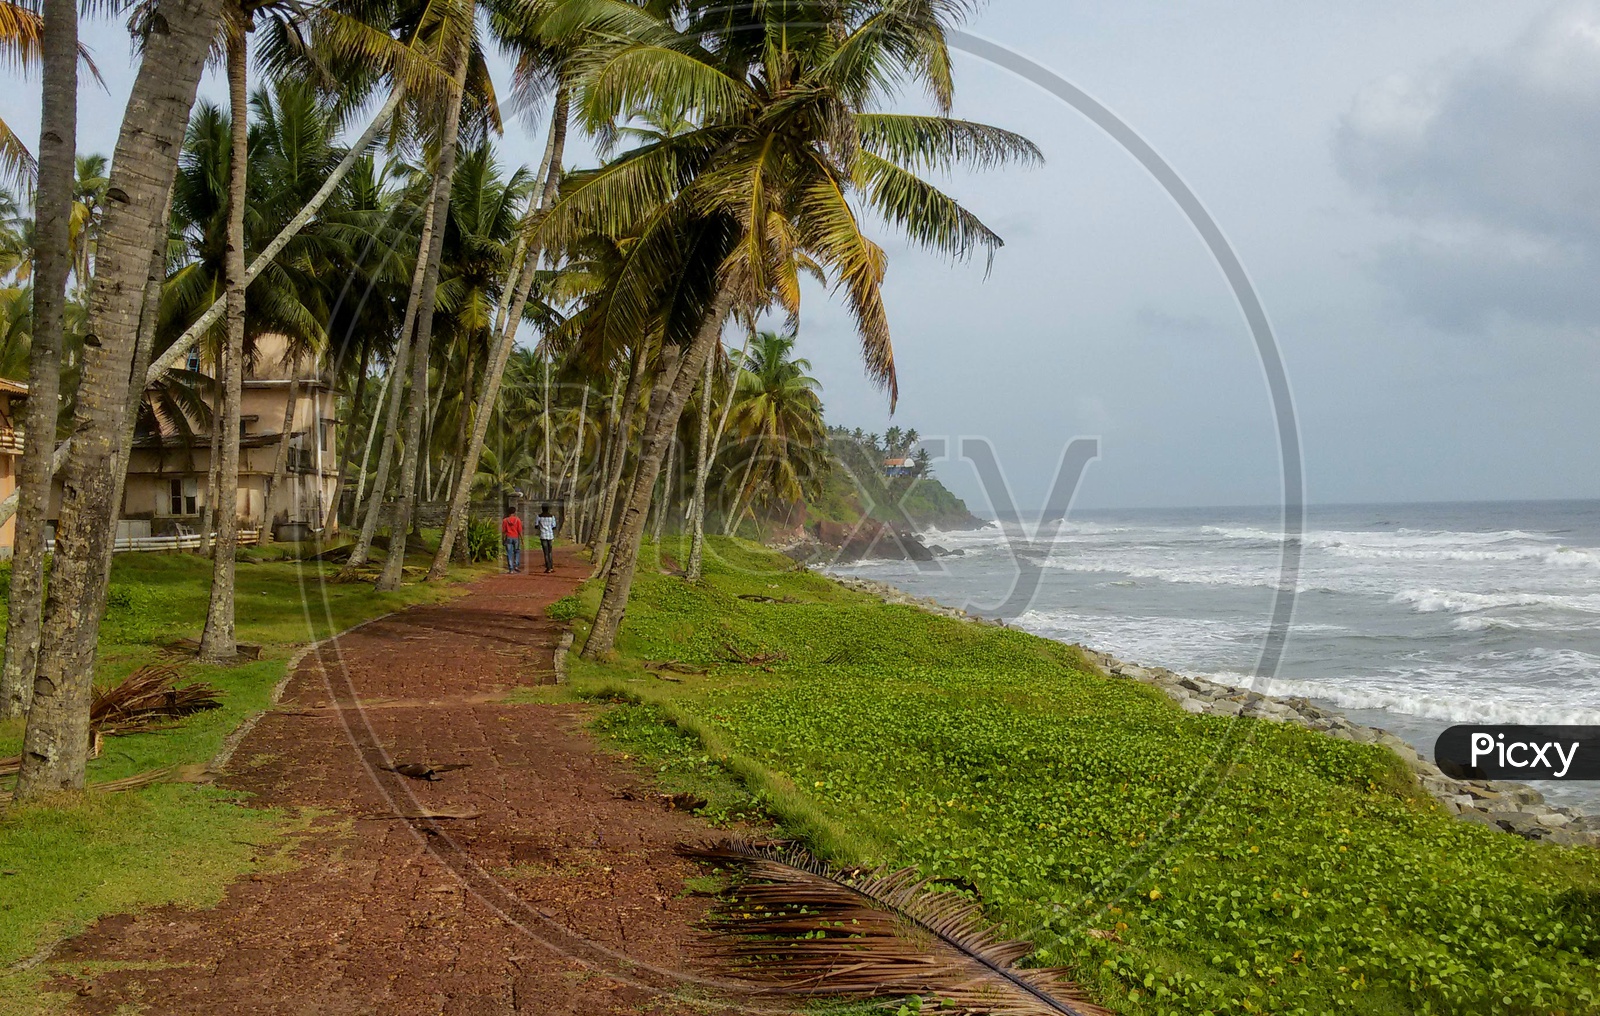 People walking near a beachside with coconut trees